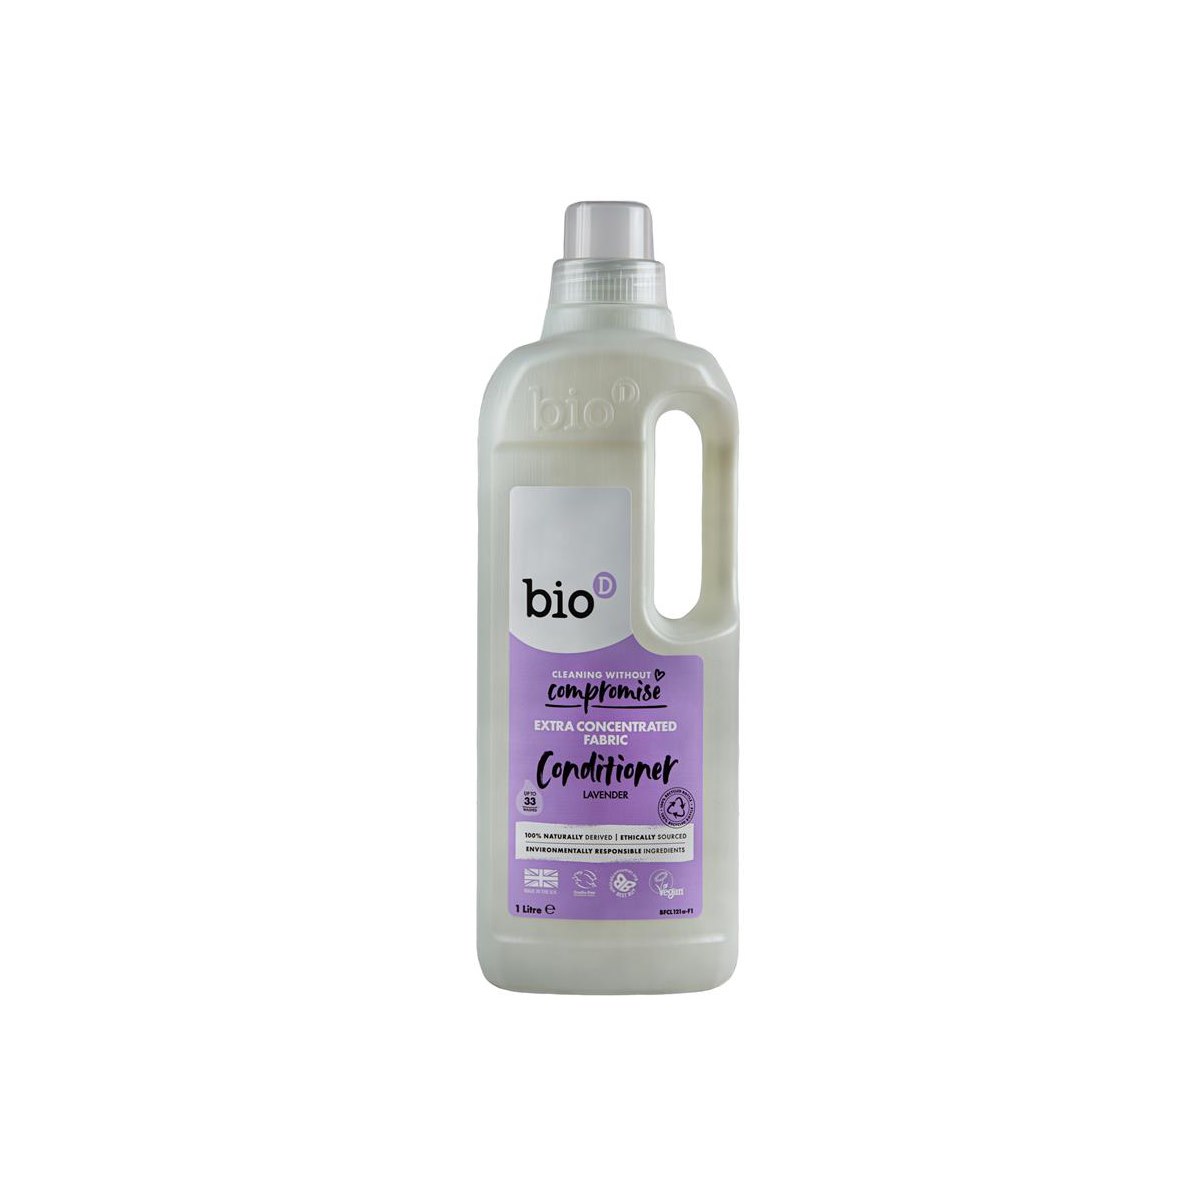 Bio-D Extra Concentrated Lavender Fabric Conditioner 1 Litre